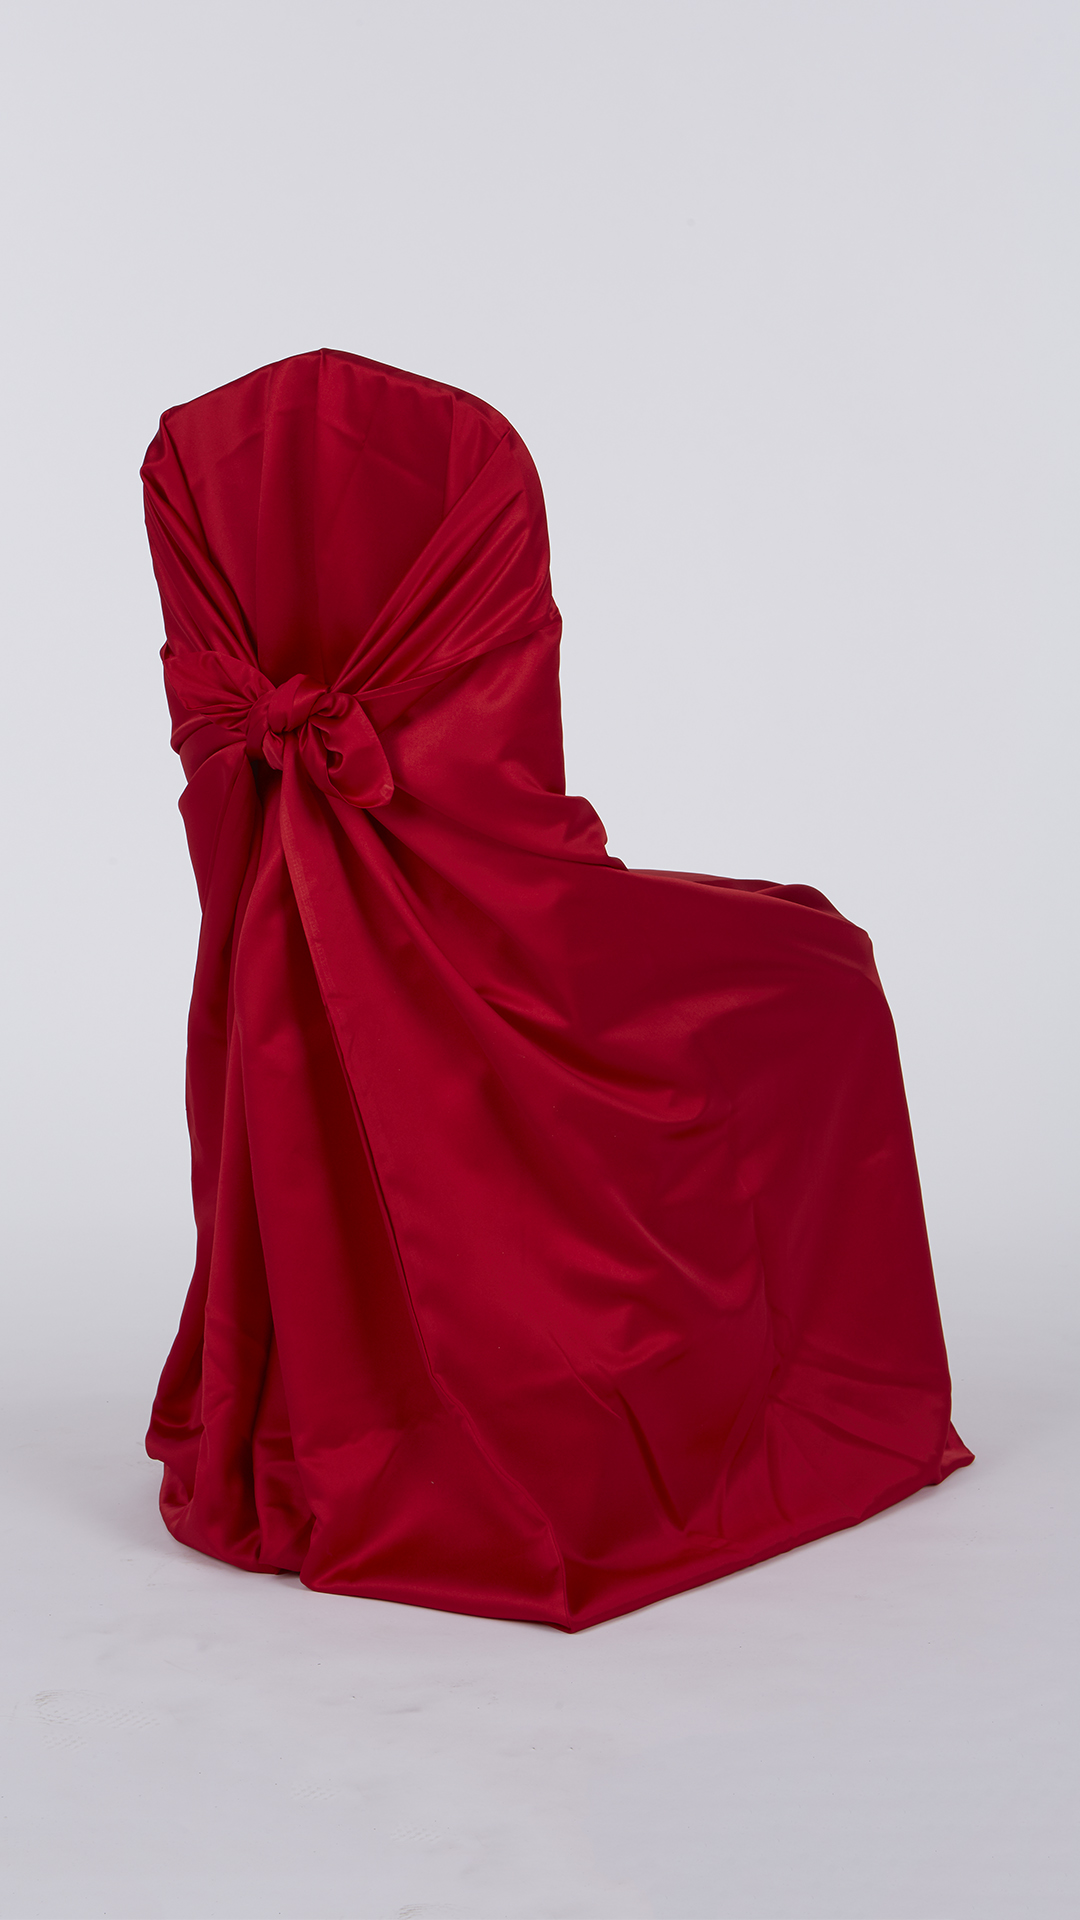 Red Hug Chair Cover Chair Decor